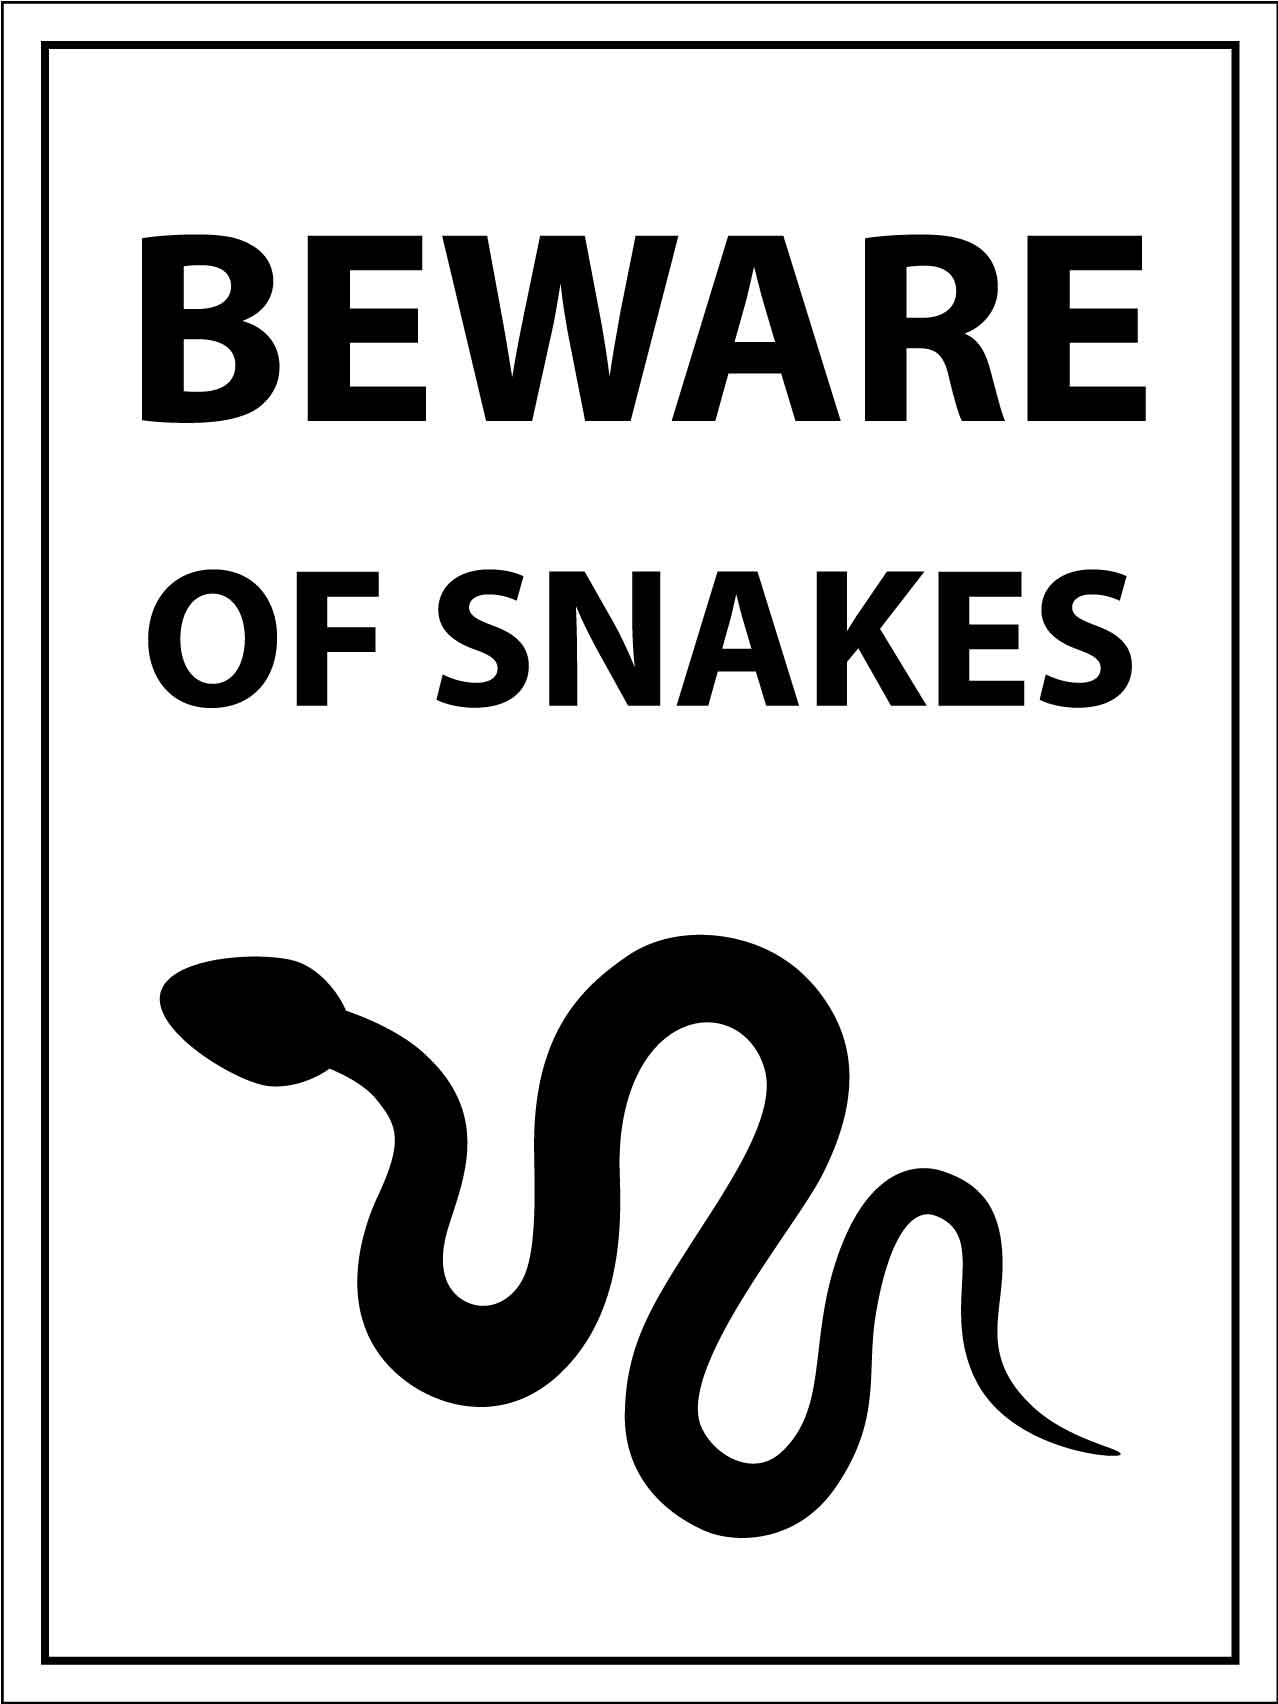 Beware Of Snakes Sign